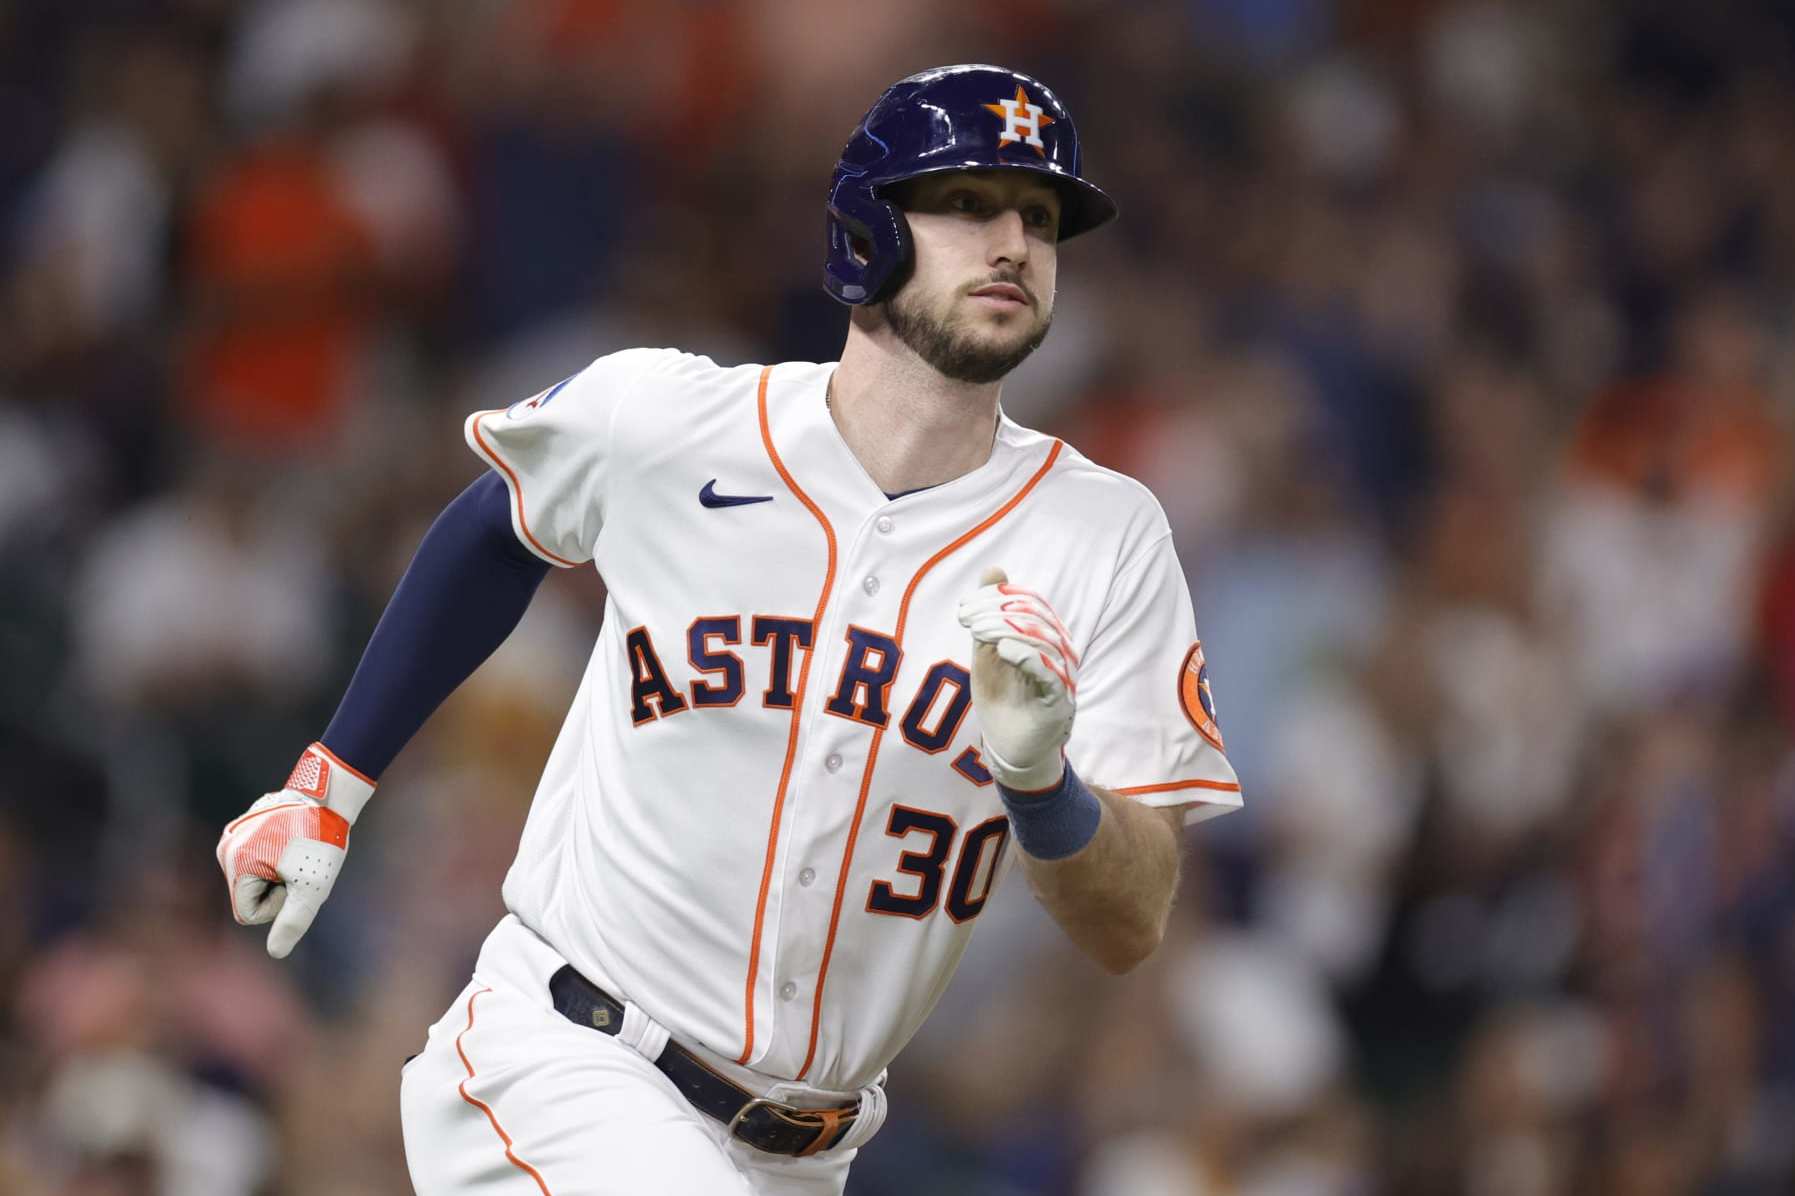 Astros' Kyle Tucker on track to join elite 30-30 club with power